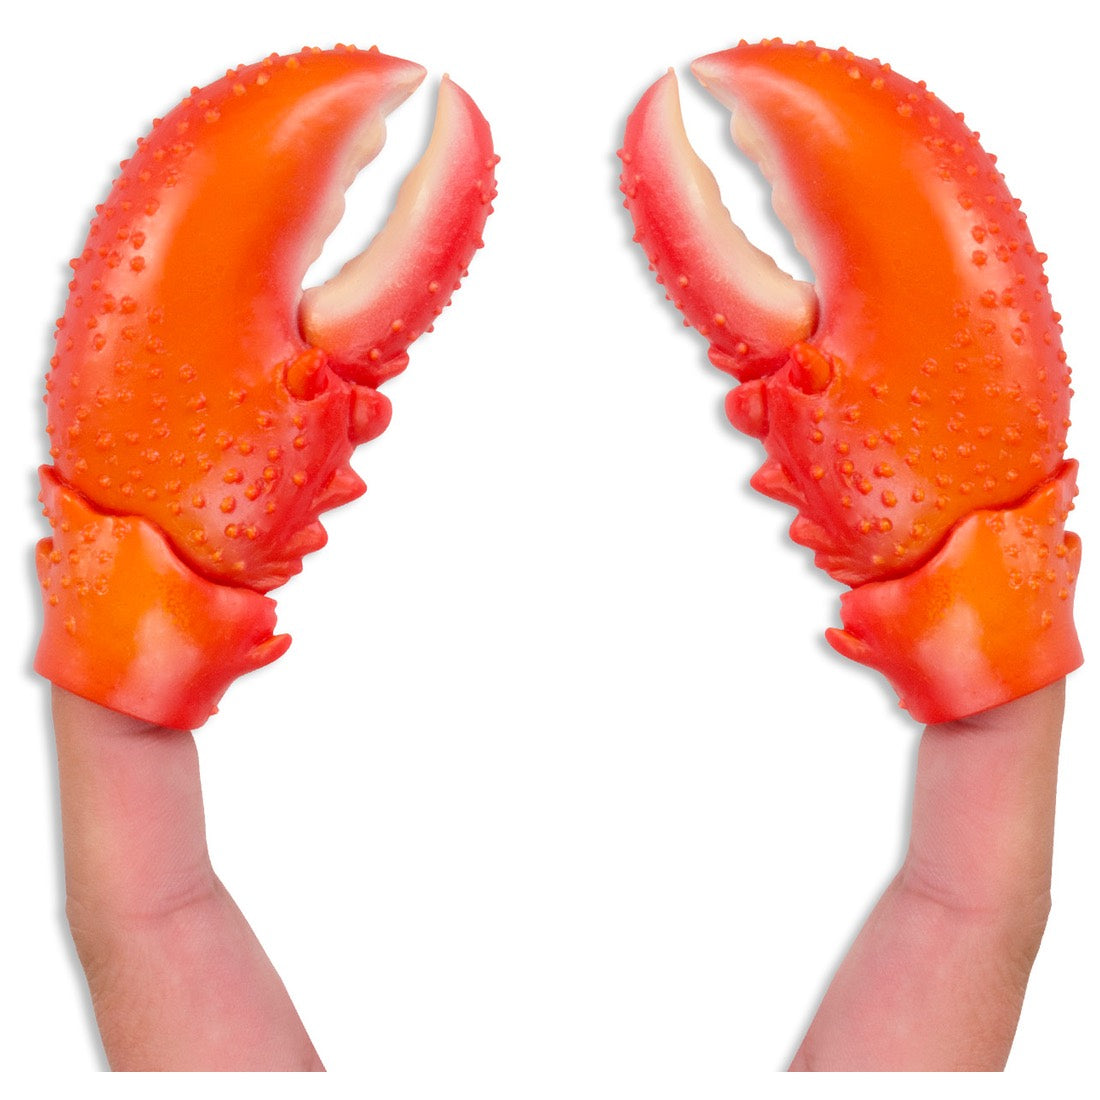 Finger Lobster Claws pack of 2